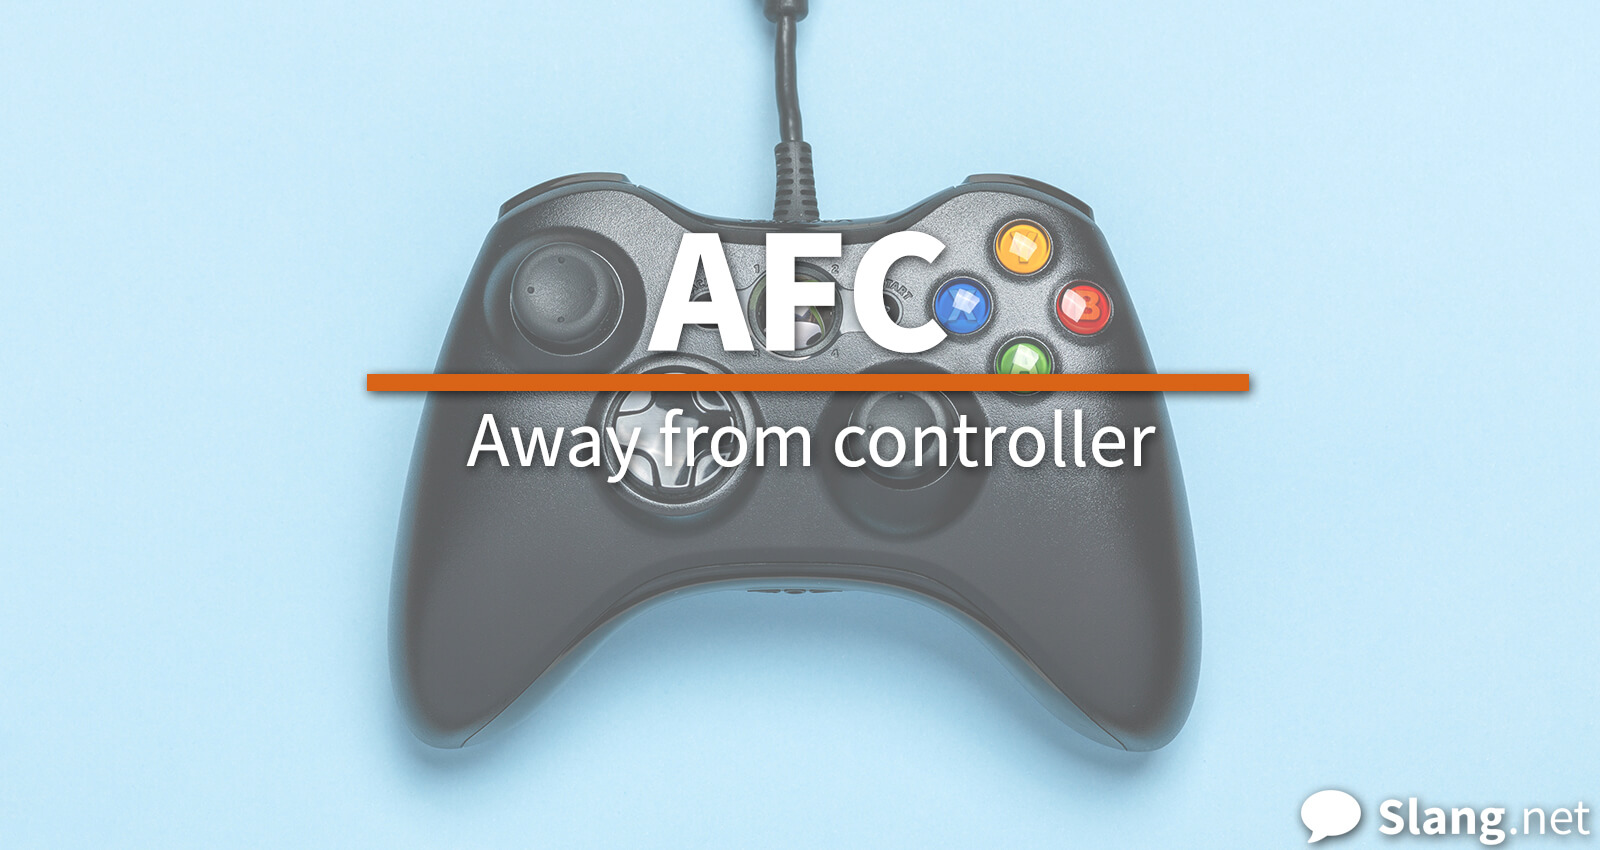 Gamers use AFC to mean &quot;away from controller&quot;